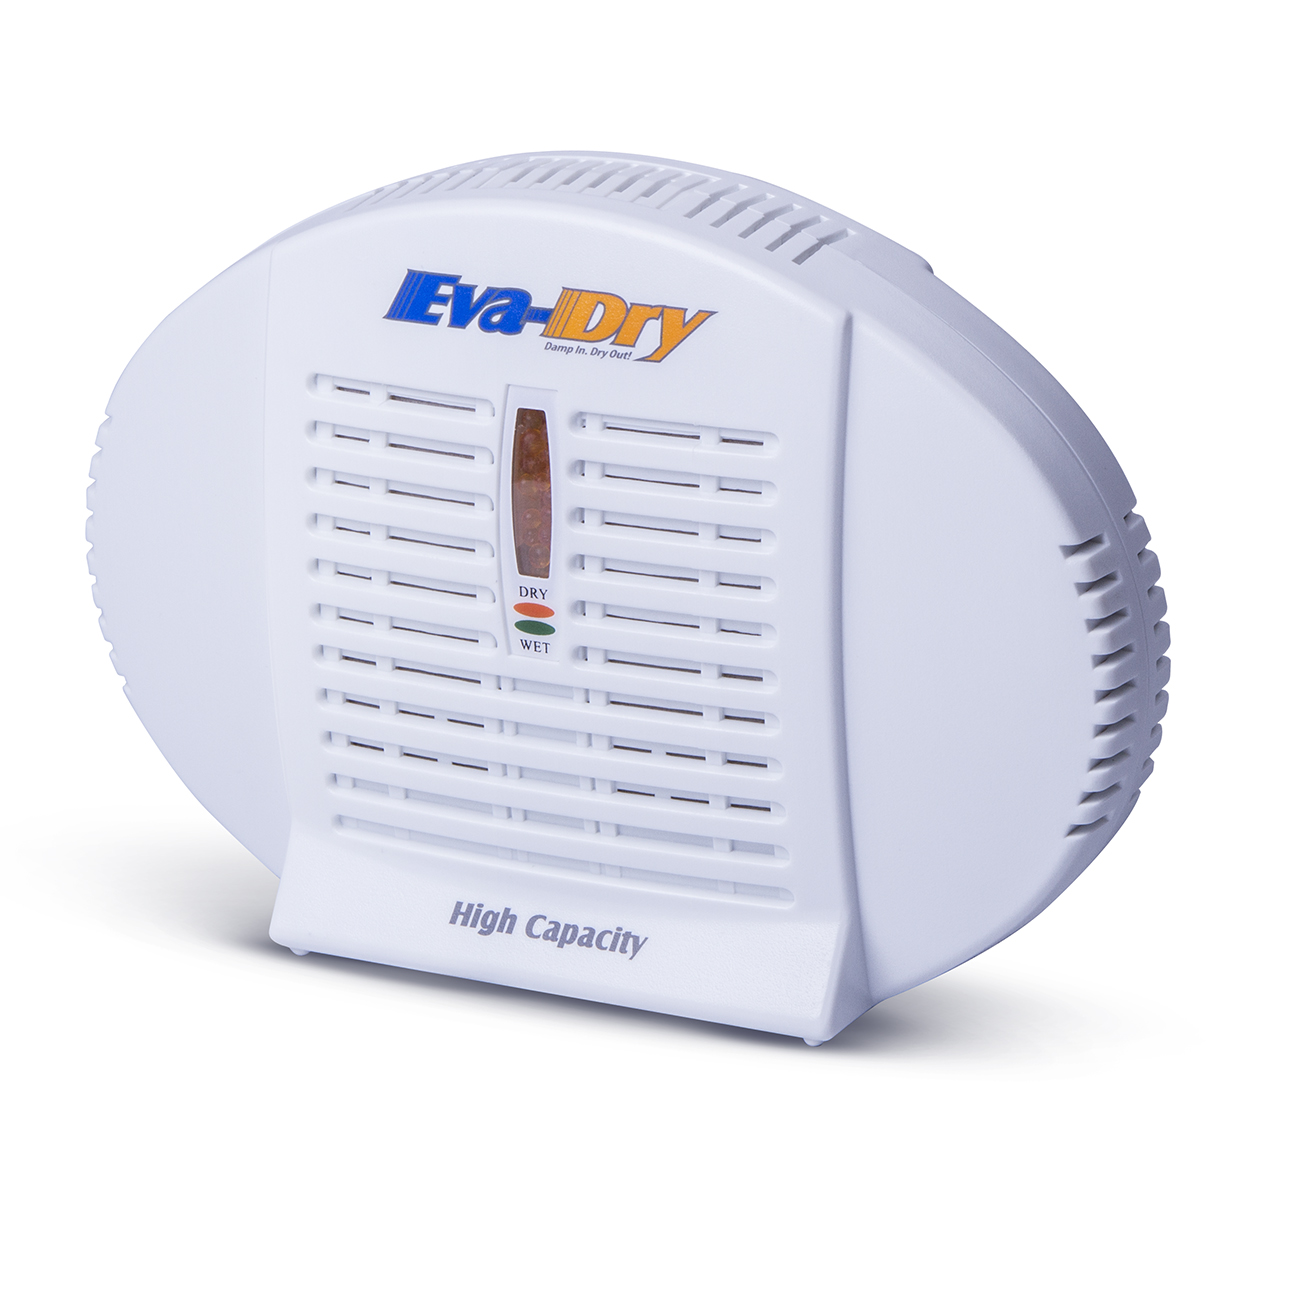 Details about   Part 9993,Liberty Safe & Security Prod,Eva Dry Dehumidifier Remove Moisture In 